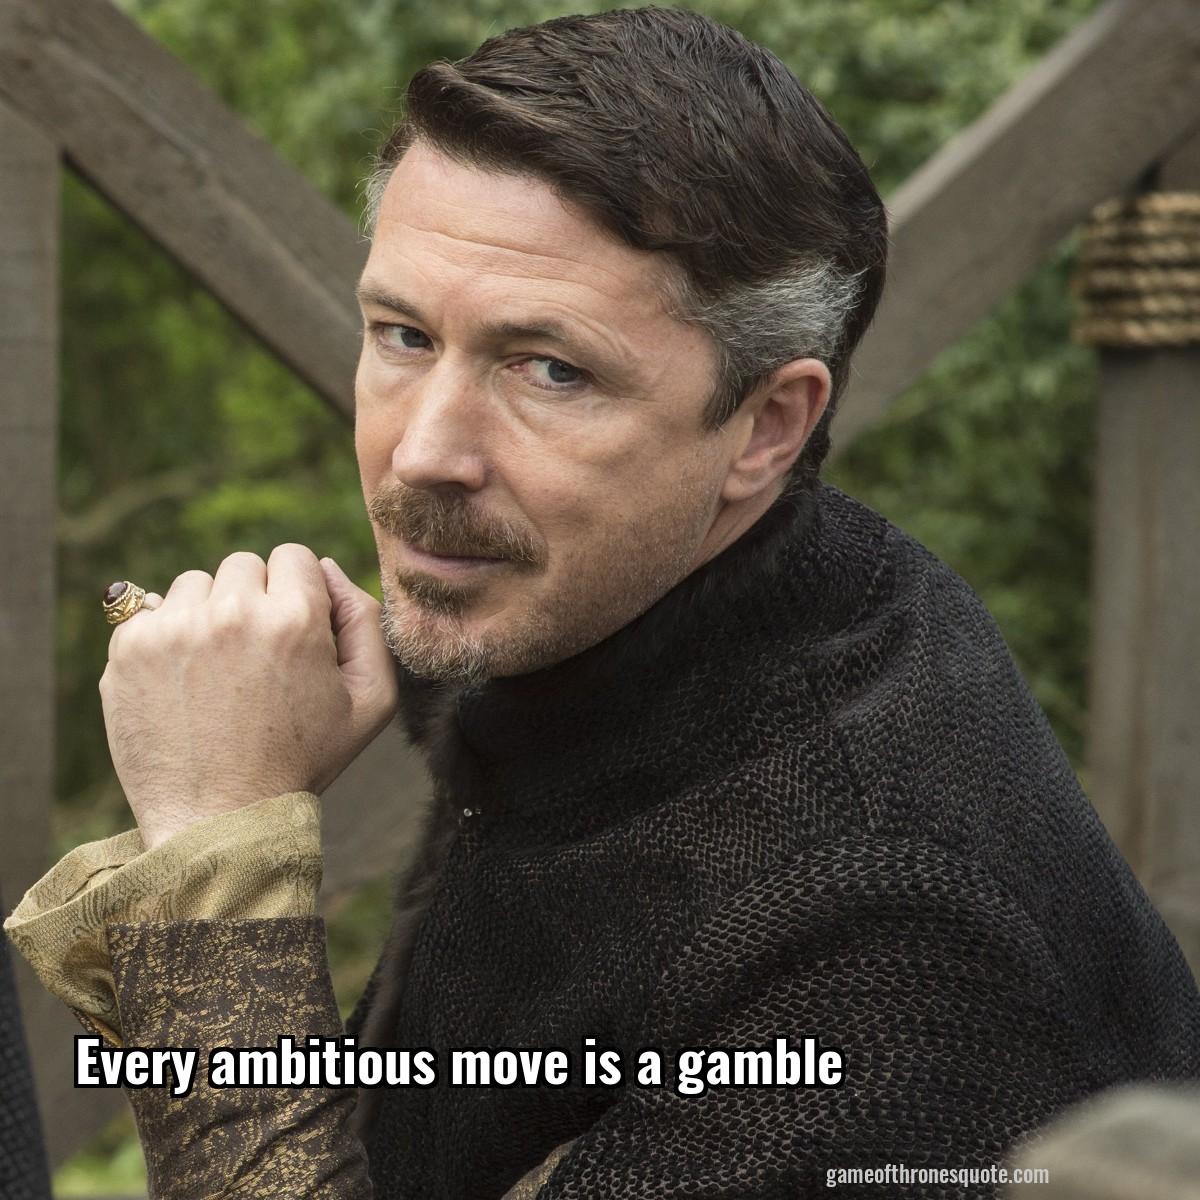 Every ambitious move is a gamble